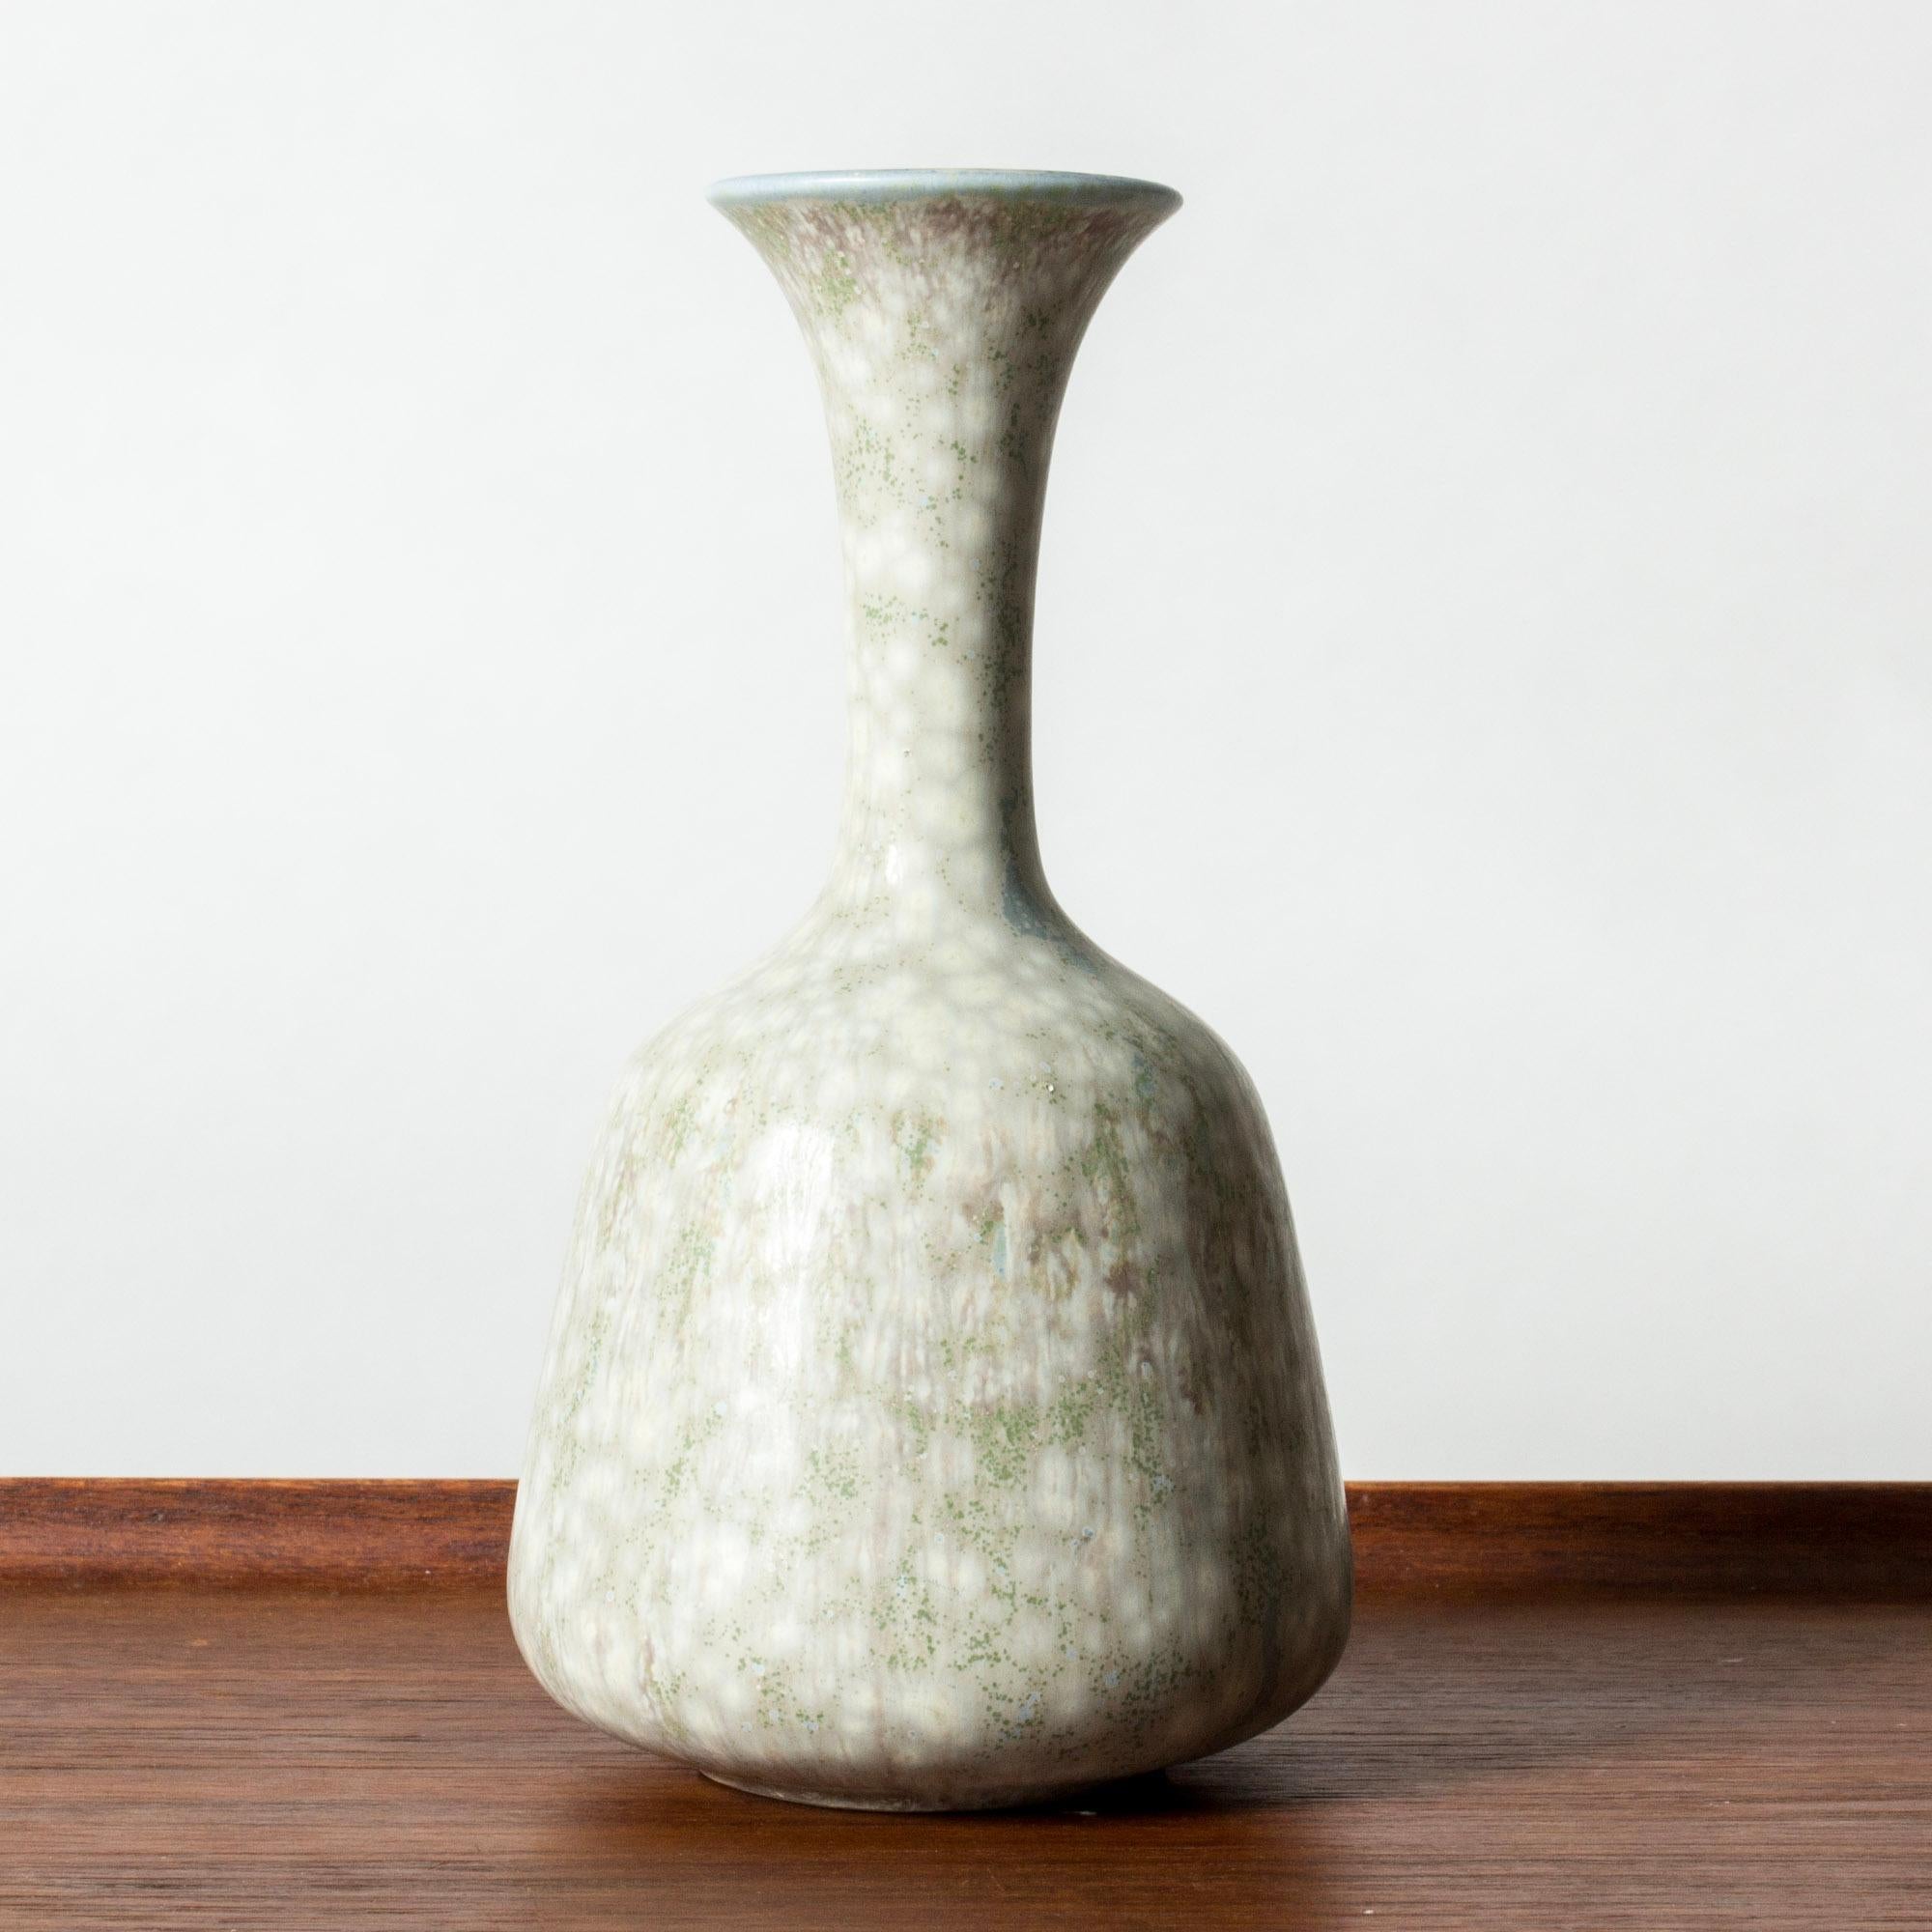 Beautiful stoneware vase by Gunnar Nylund, in a plump form with a slender neck. Glazed pale greenish blue with a white “Mimosa” pattern.

Gunnar Nylund was one of the most influential ceramicists and designers of the Swedish mid-century period. He